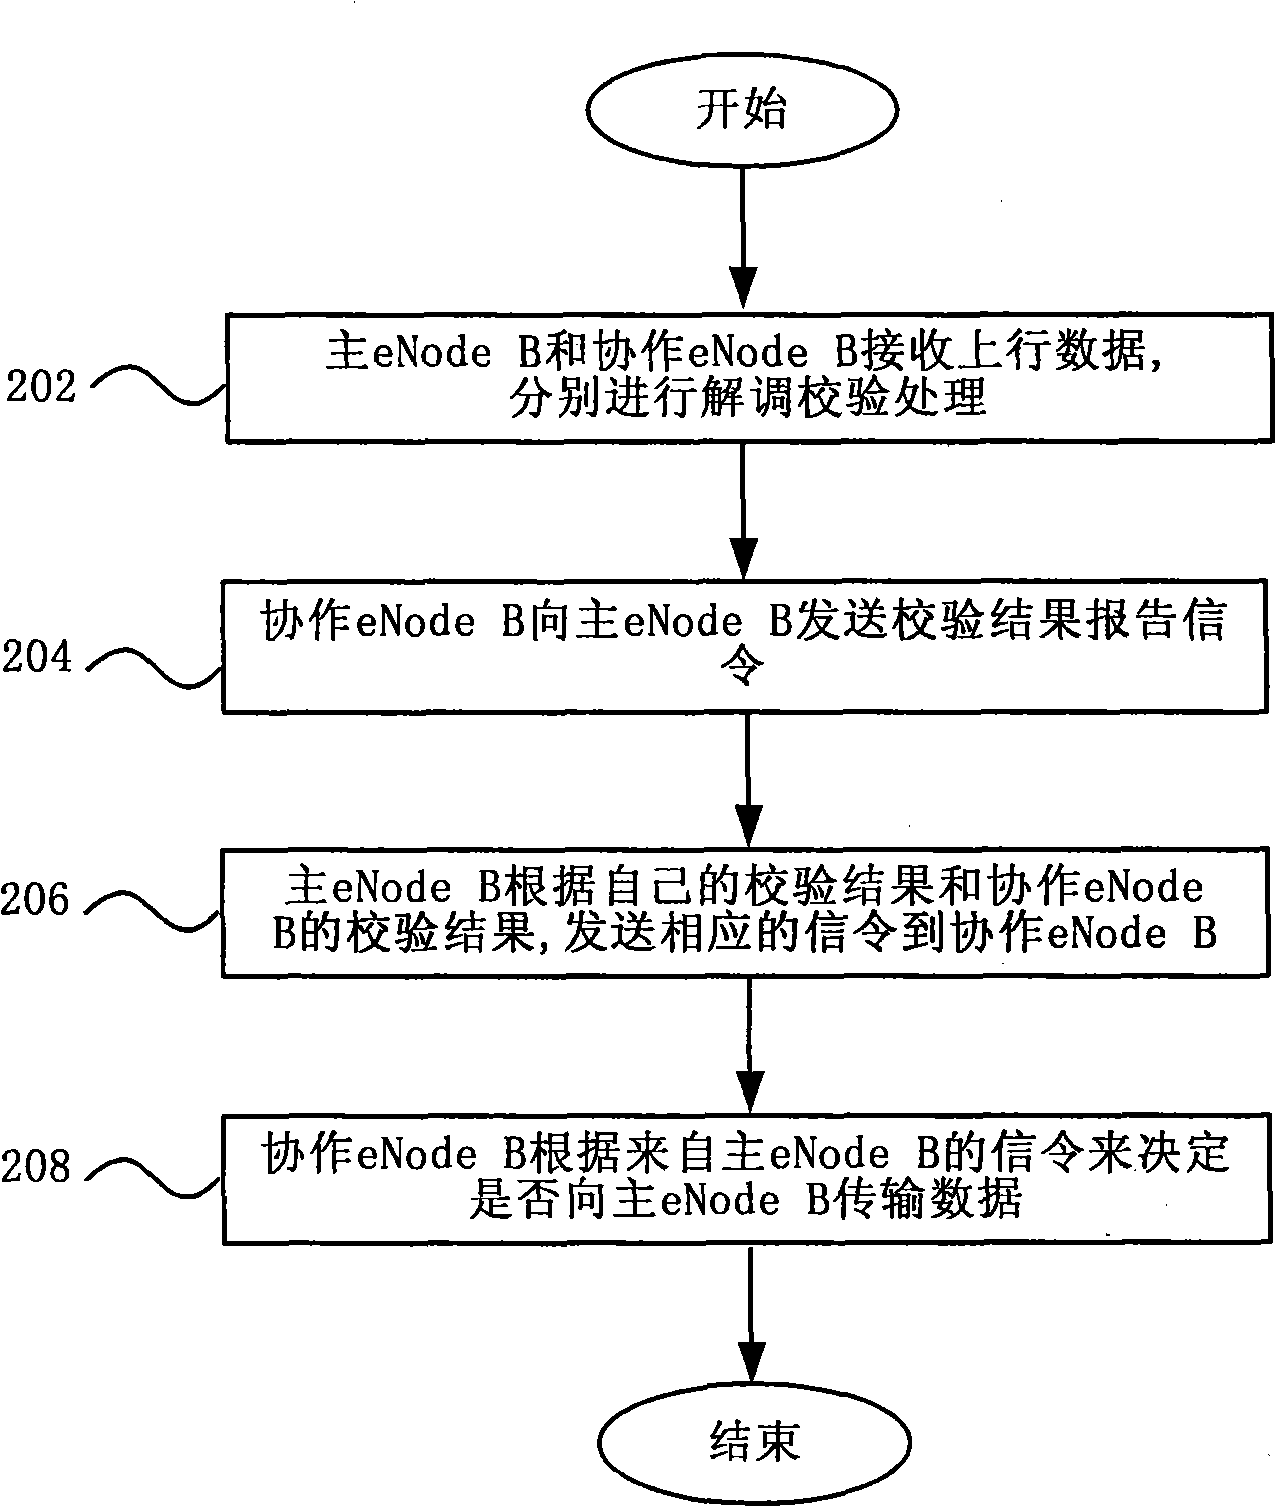 Data merging and receiving method based on uplink coordinated multipoint